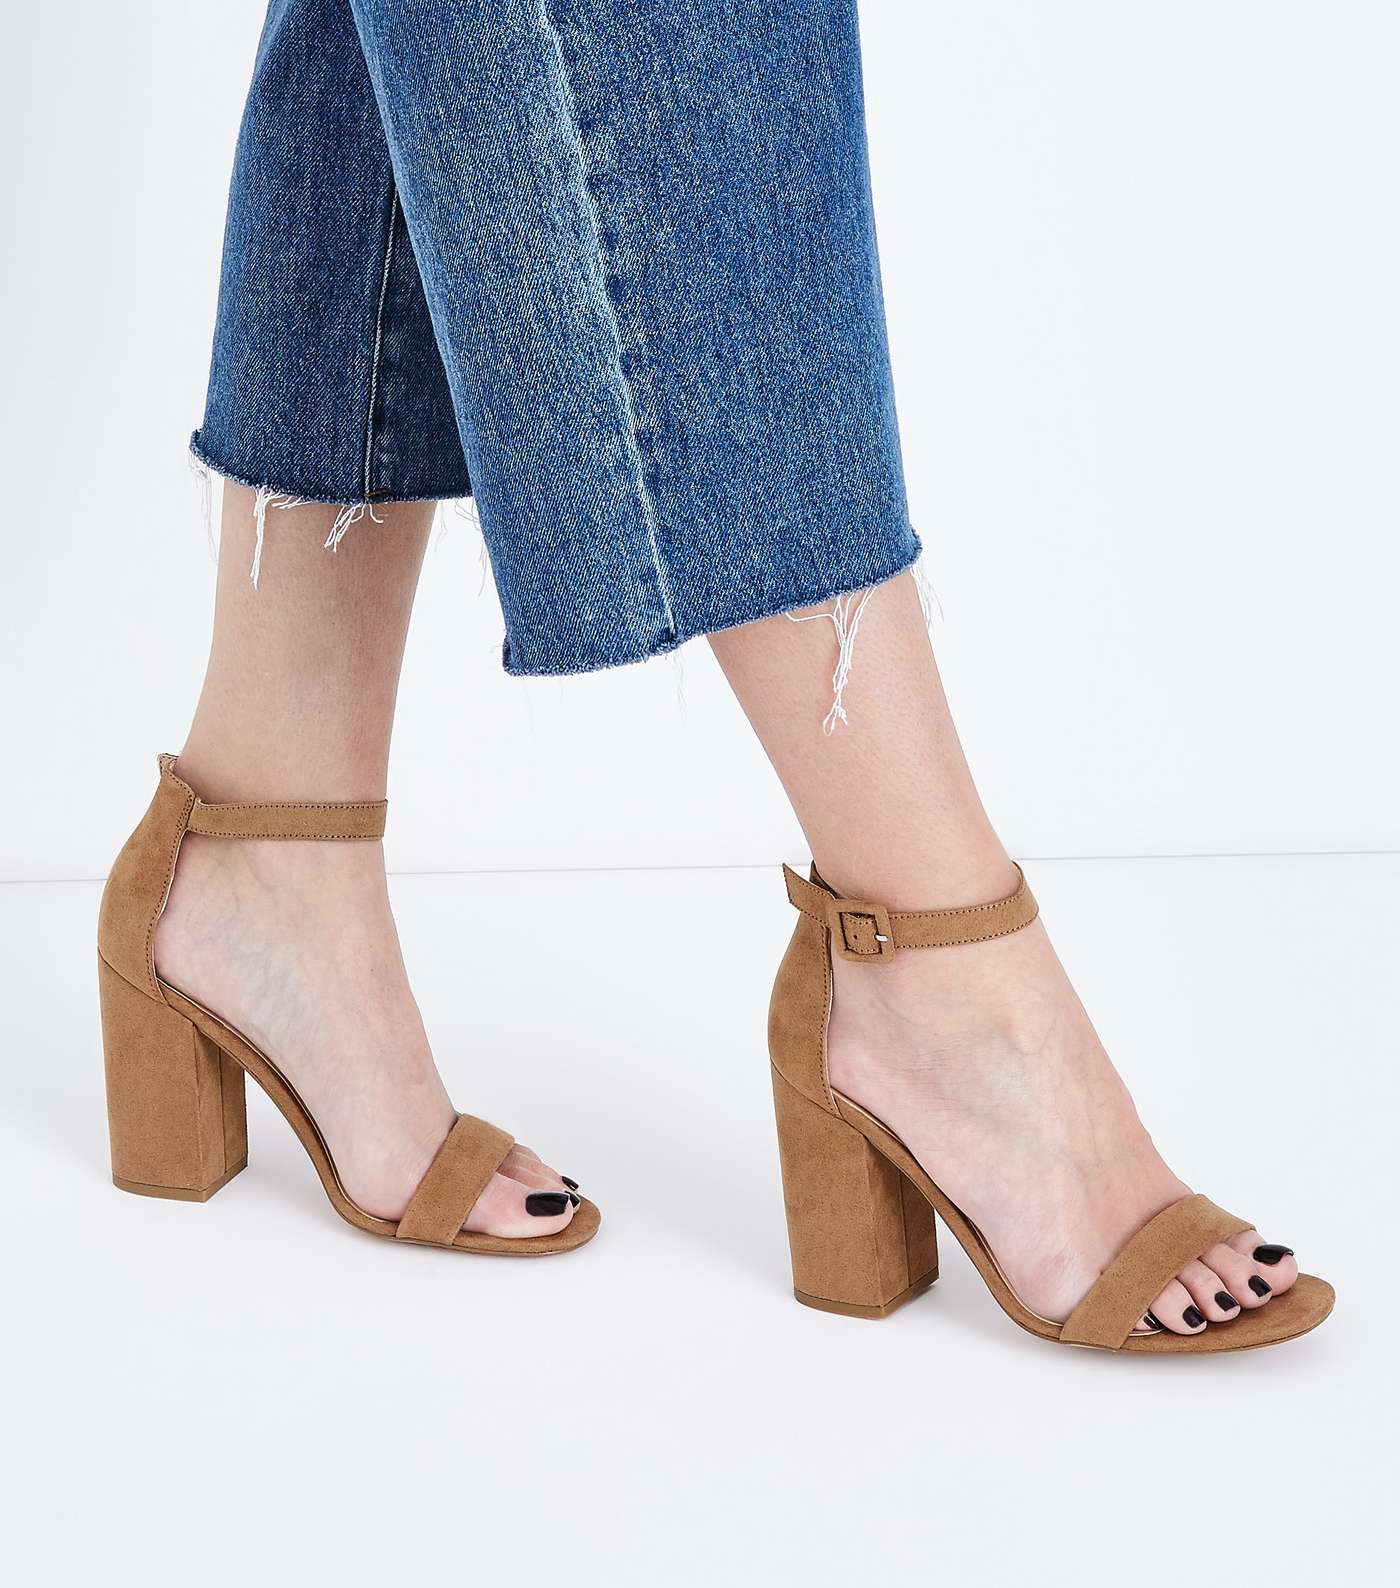 Mink Suedette Barely There Block Heels Image 2